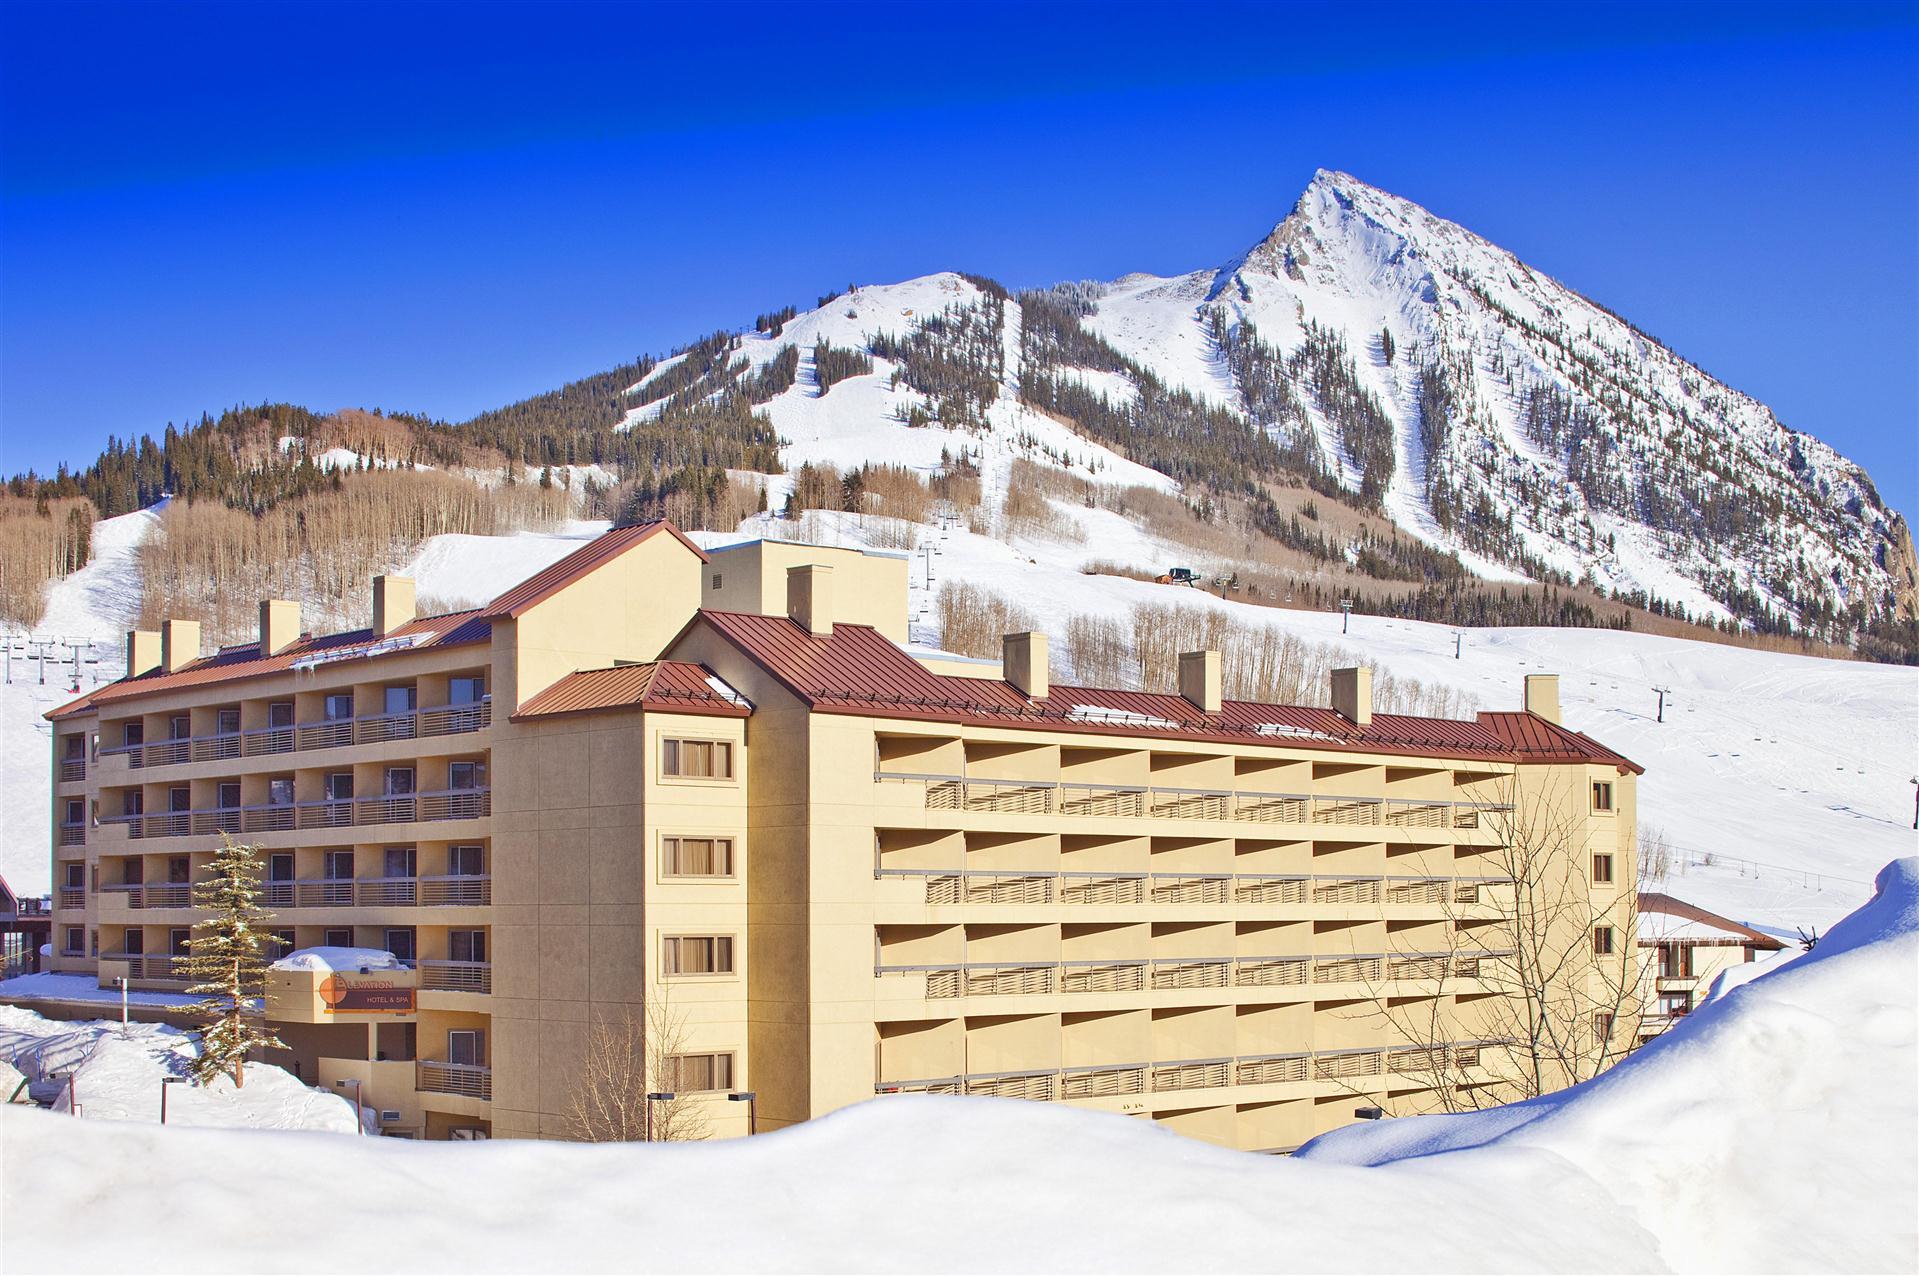 Elevation Hotel and Spa in Crested Butte, CO